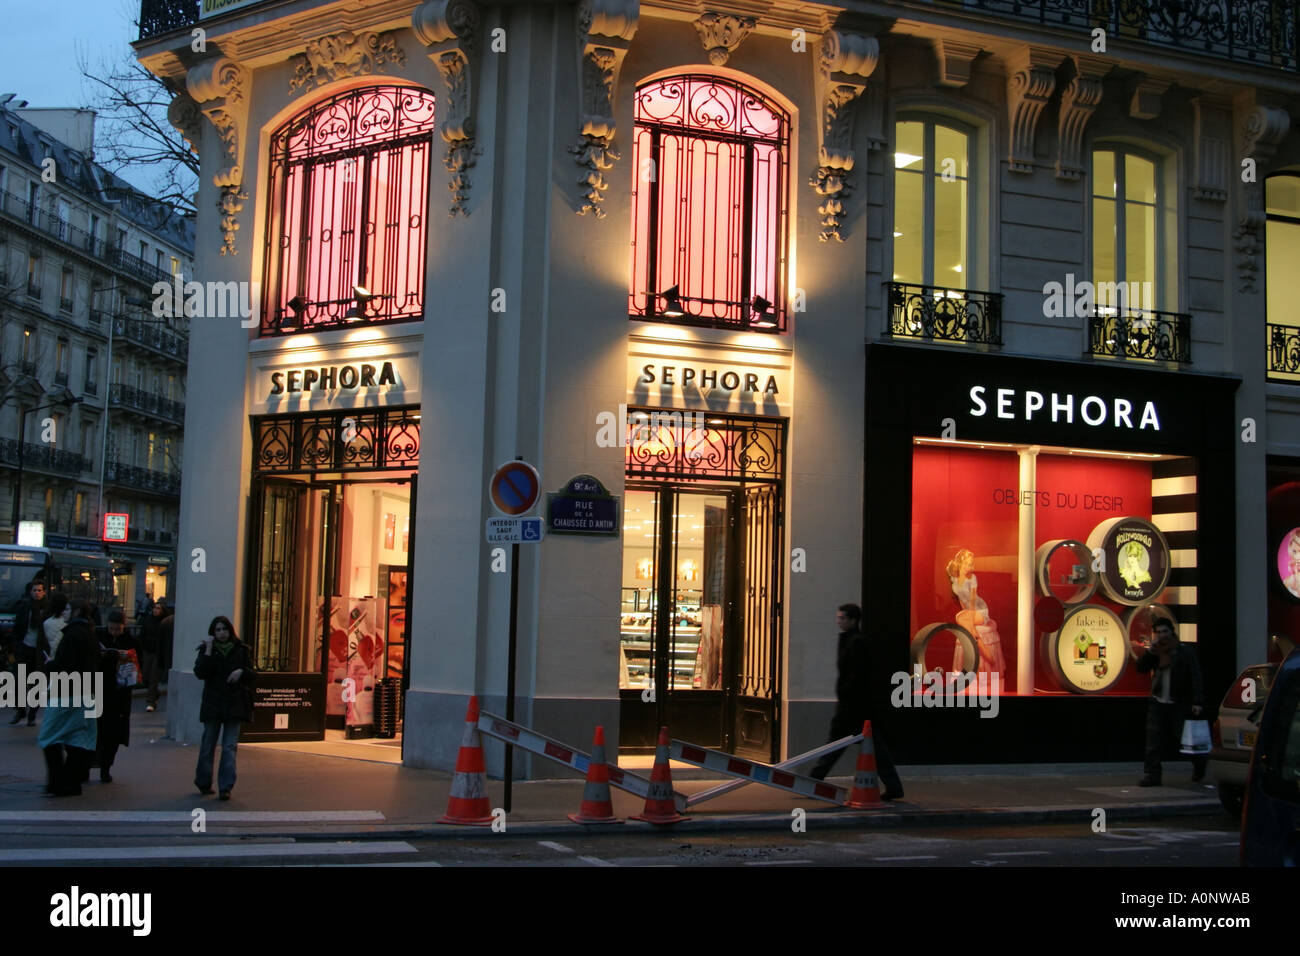 Sephora perfume and cosmetics shop in Paris France at dusk Stock Photo -  Alamy